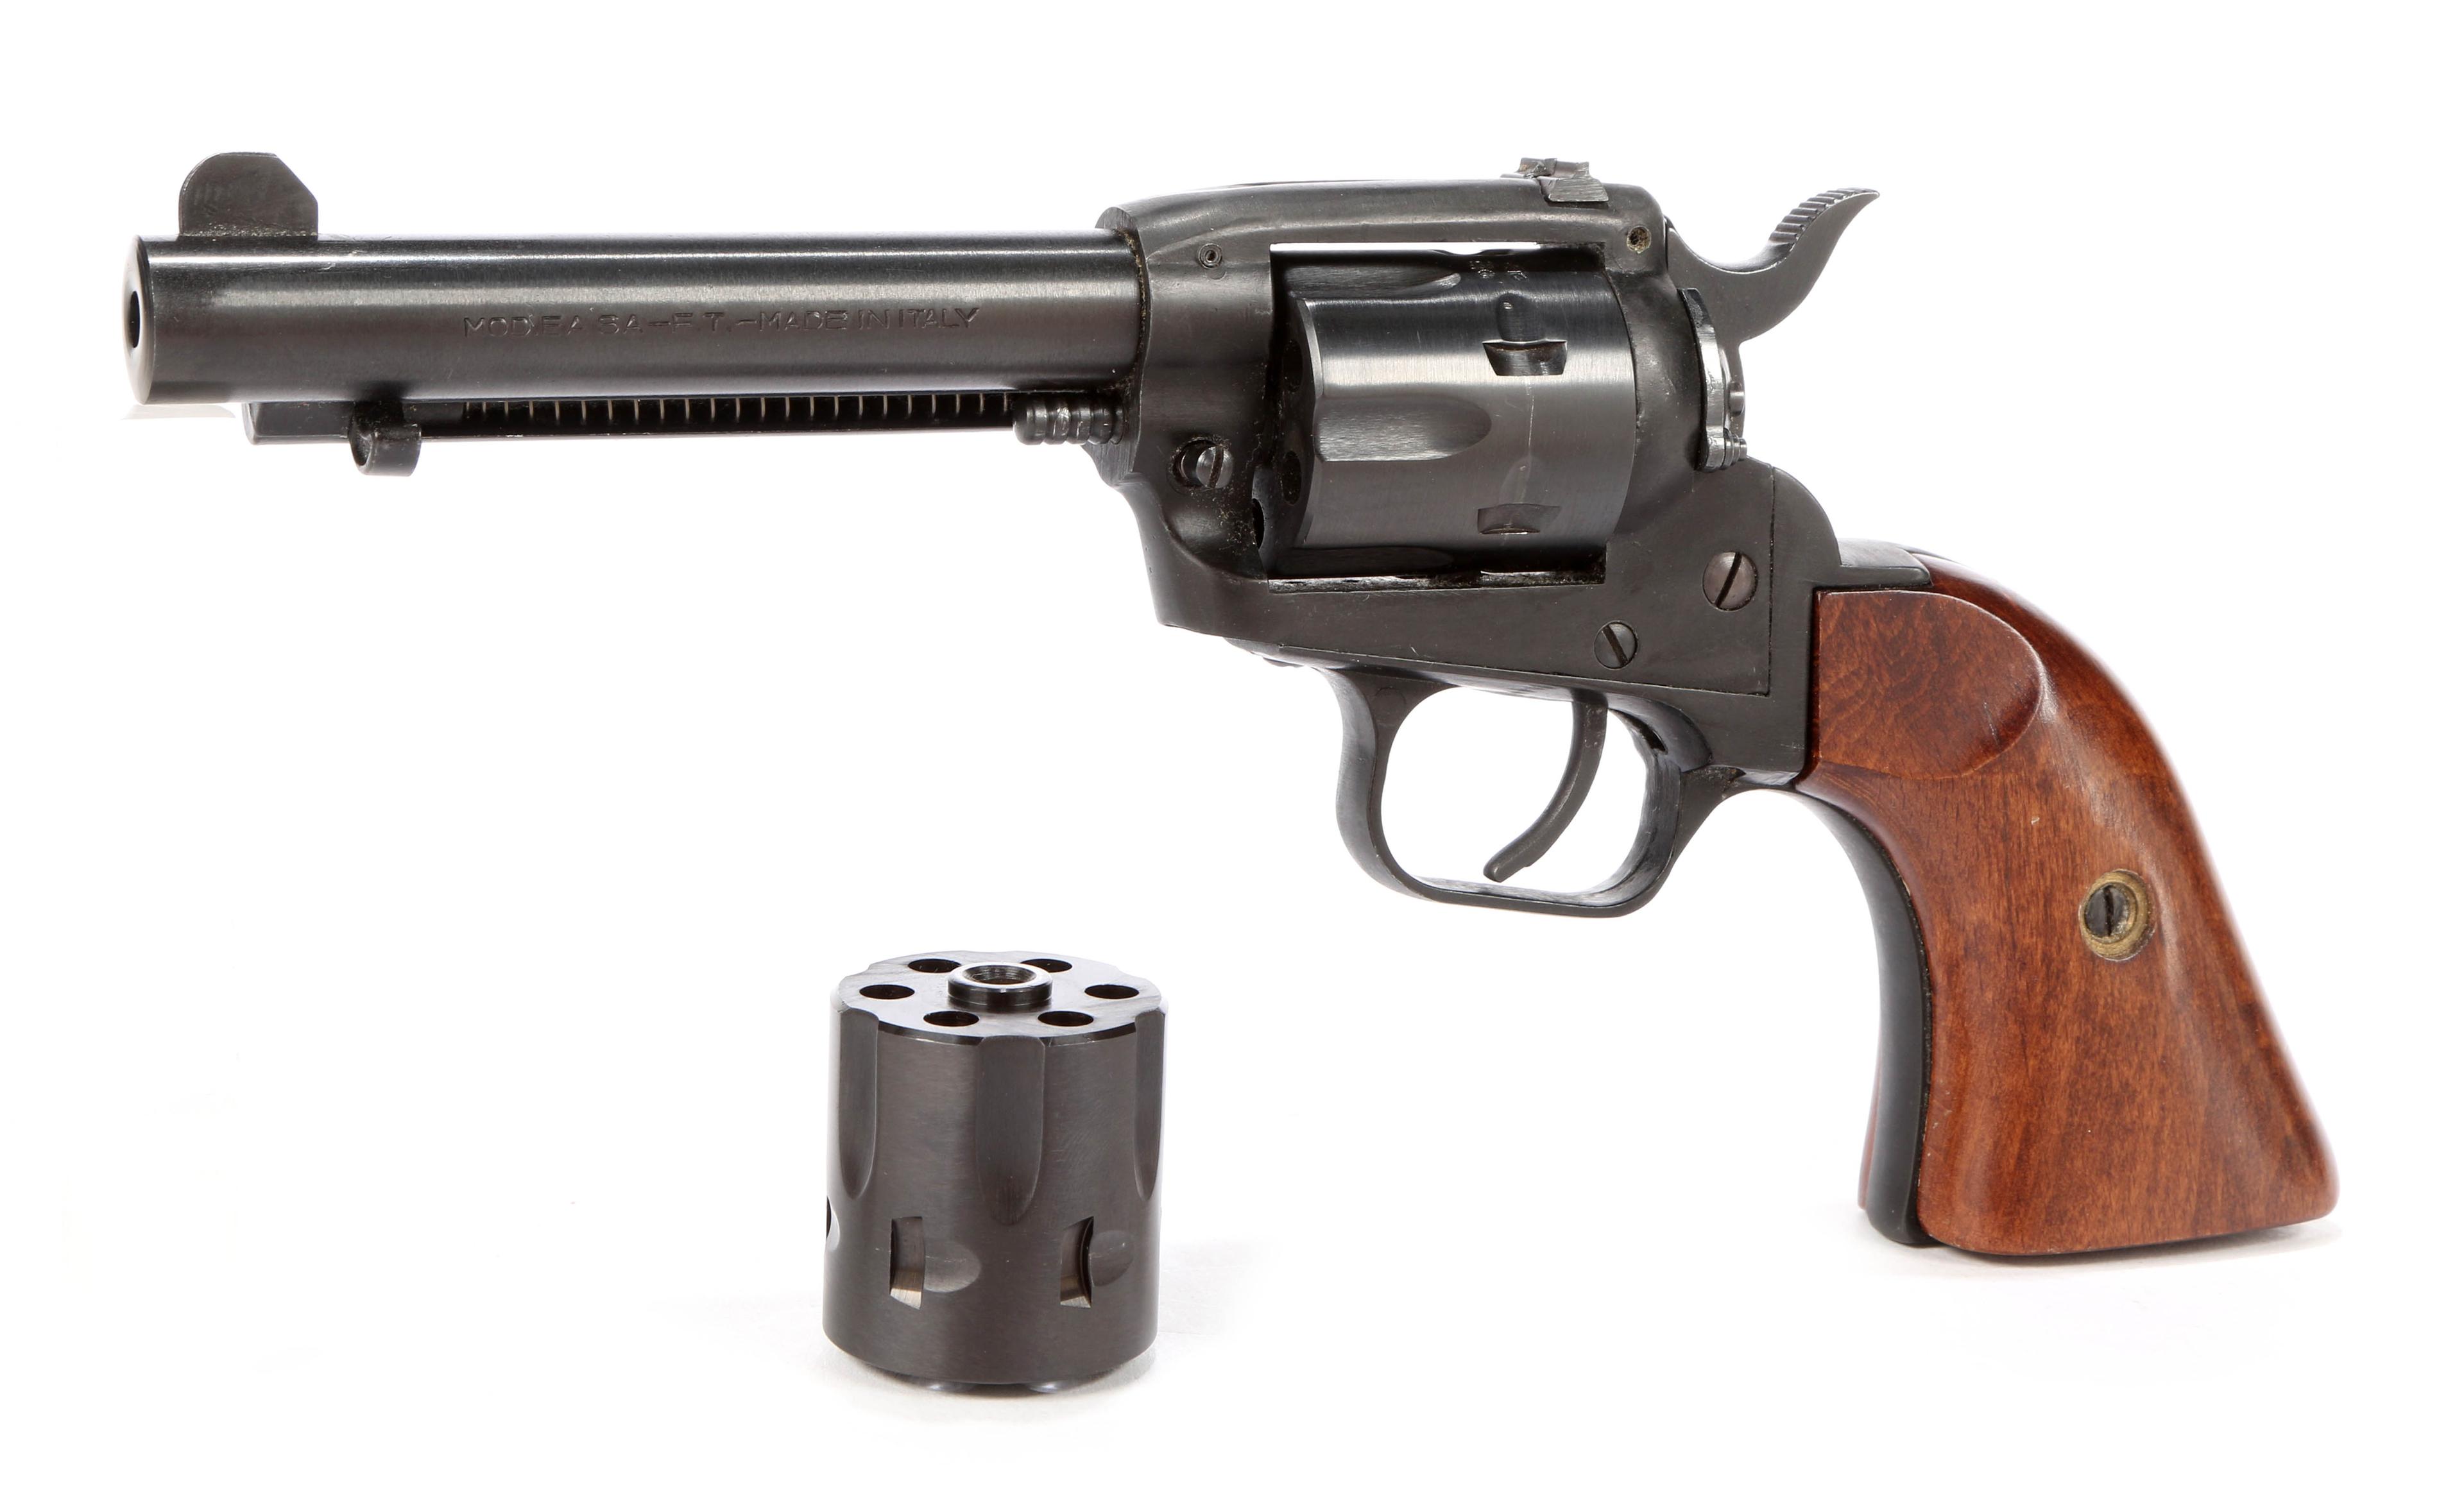 European American Corp. Revolver in .22 Long Rifle/.22 Mag.